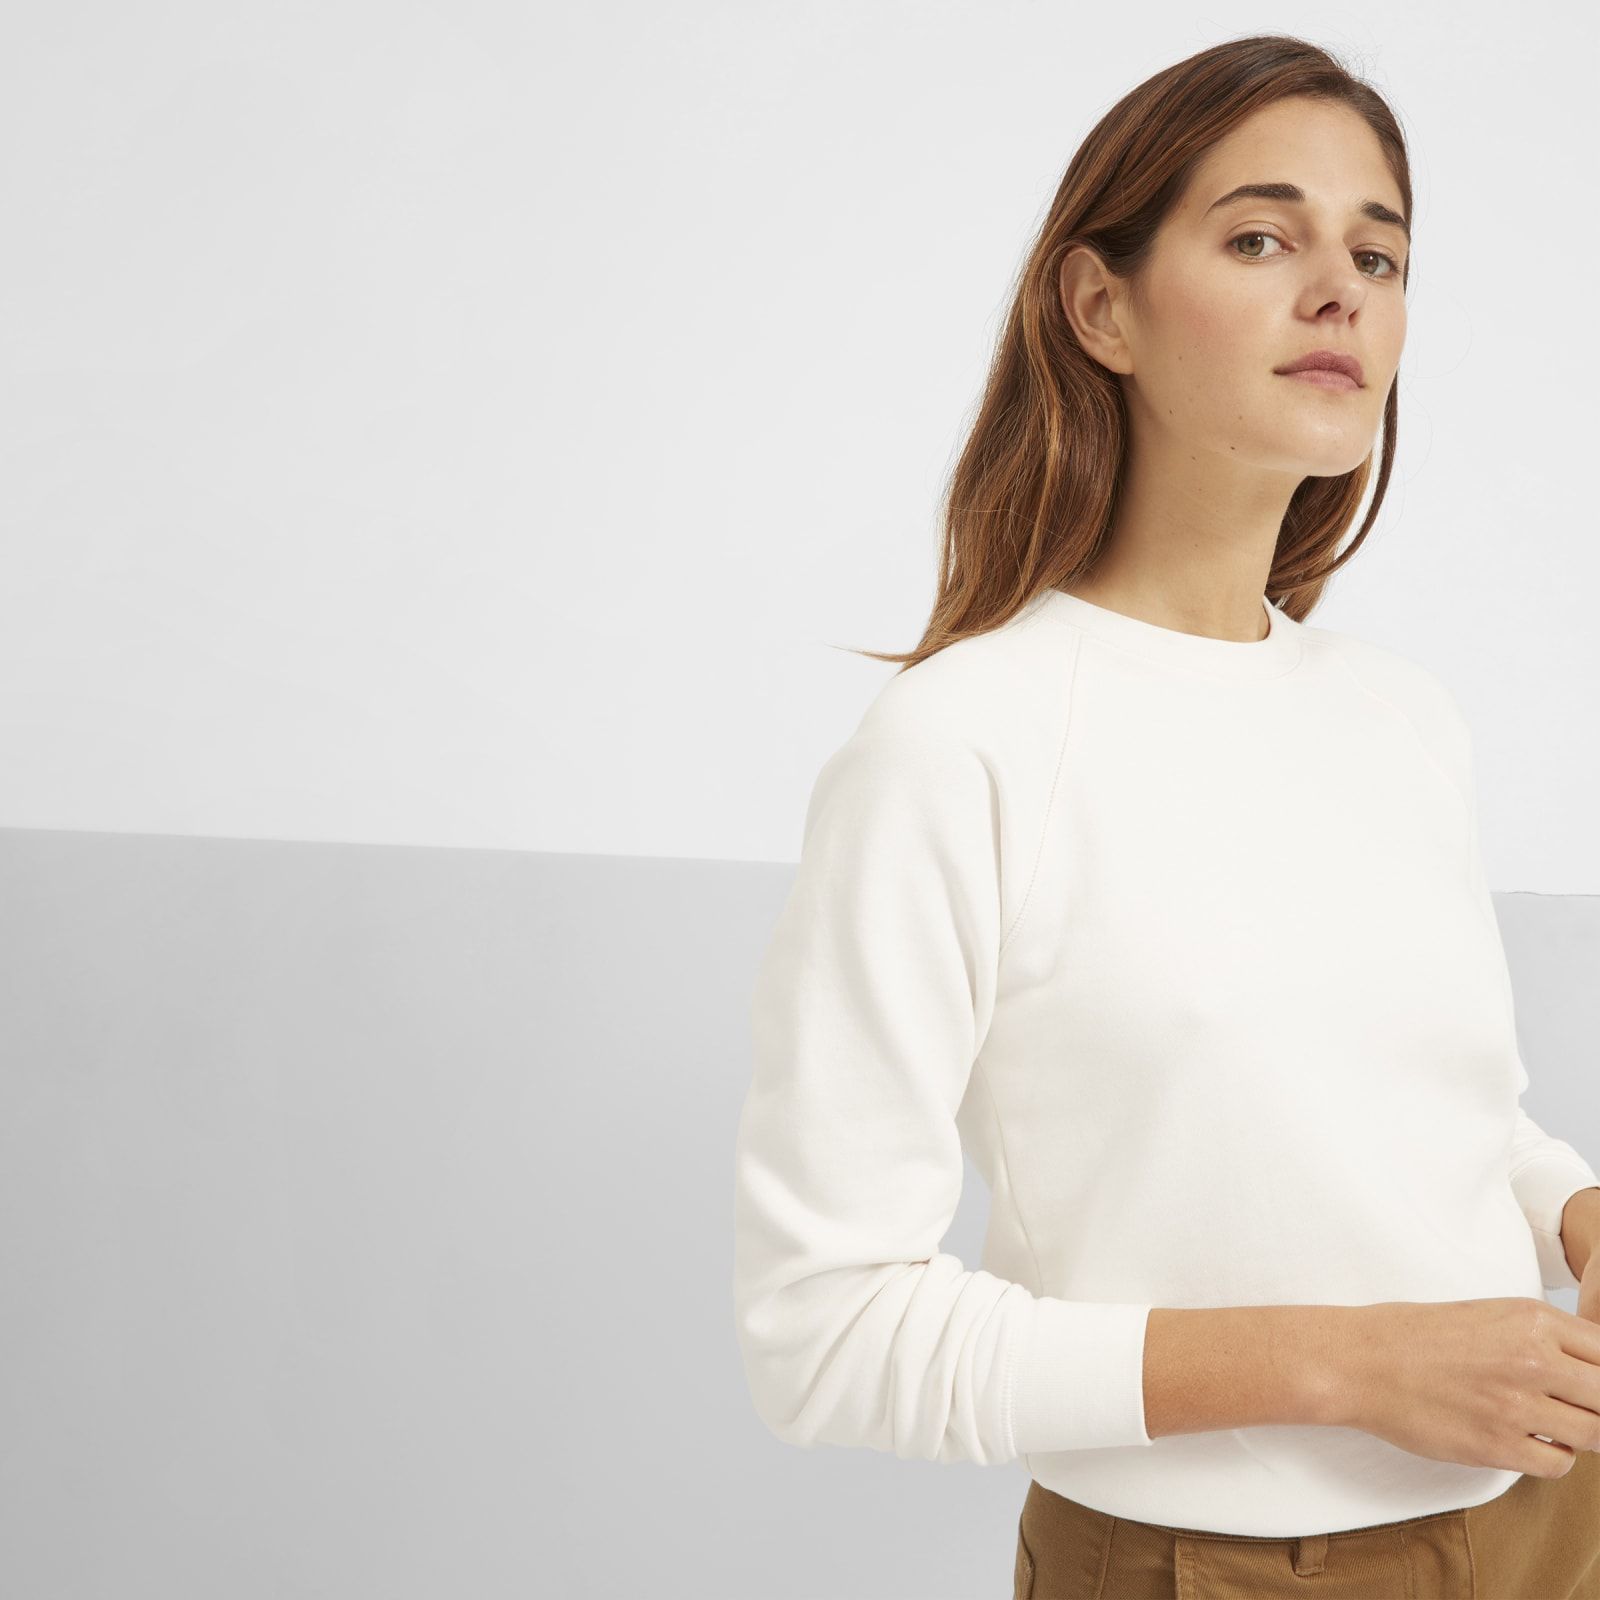 Women's Slim Classic French Terry Crew Sweater by Everlane in Bone, Size M | Everlane